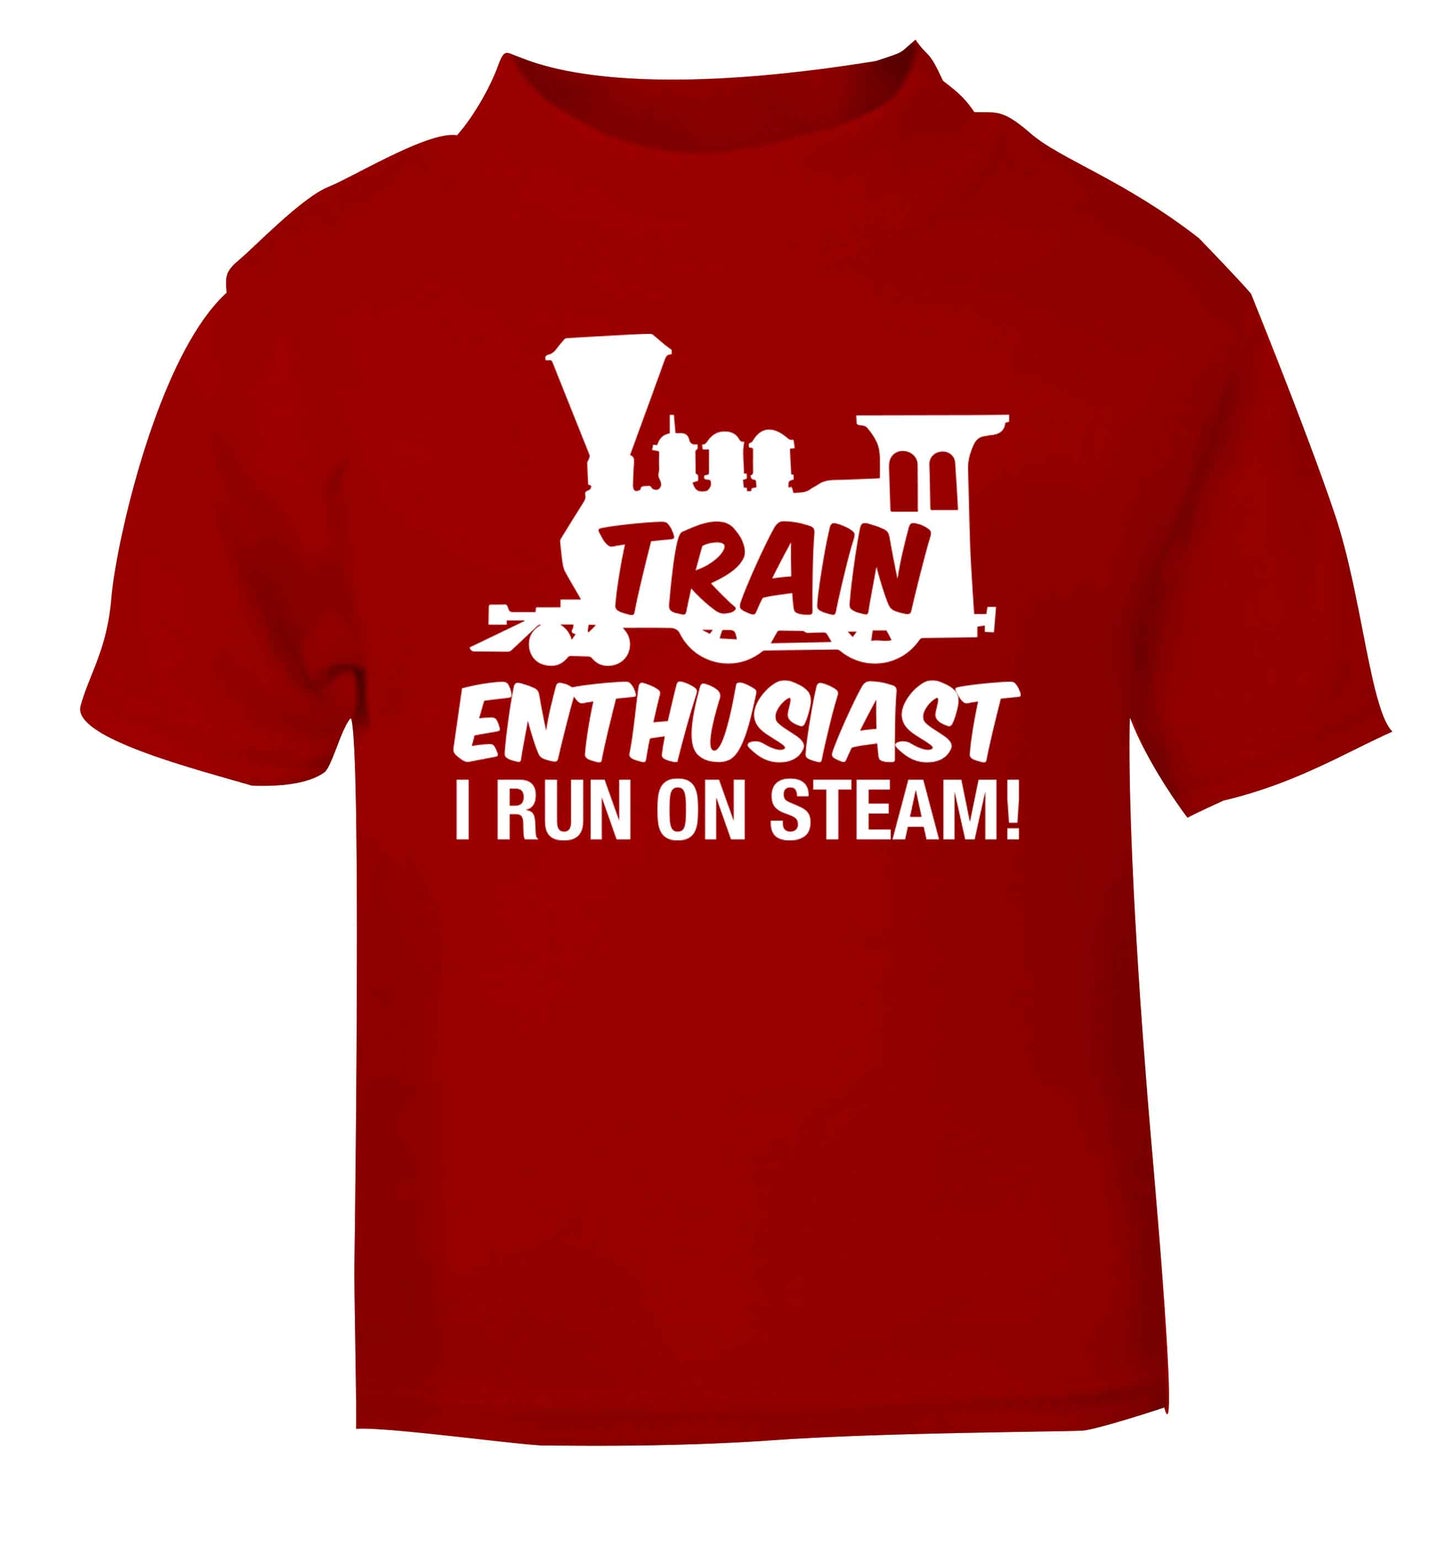 Train enthusiast I run on steam red Baby Toddler Tshirt 2 Years